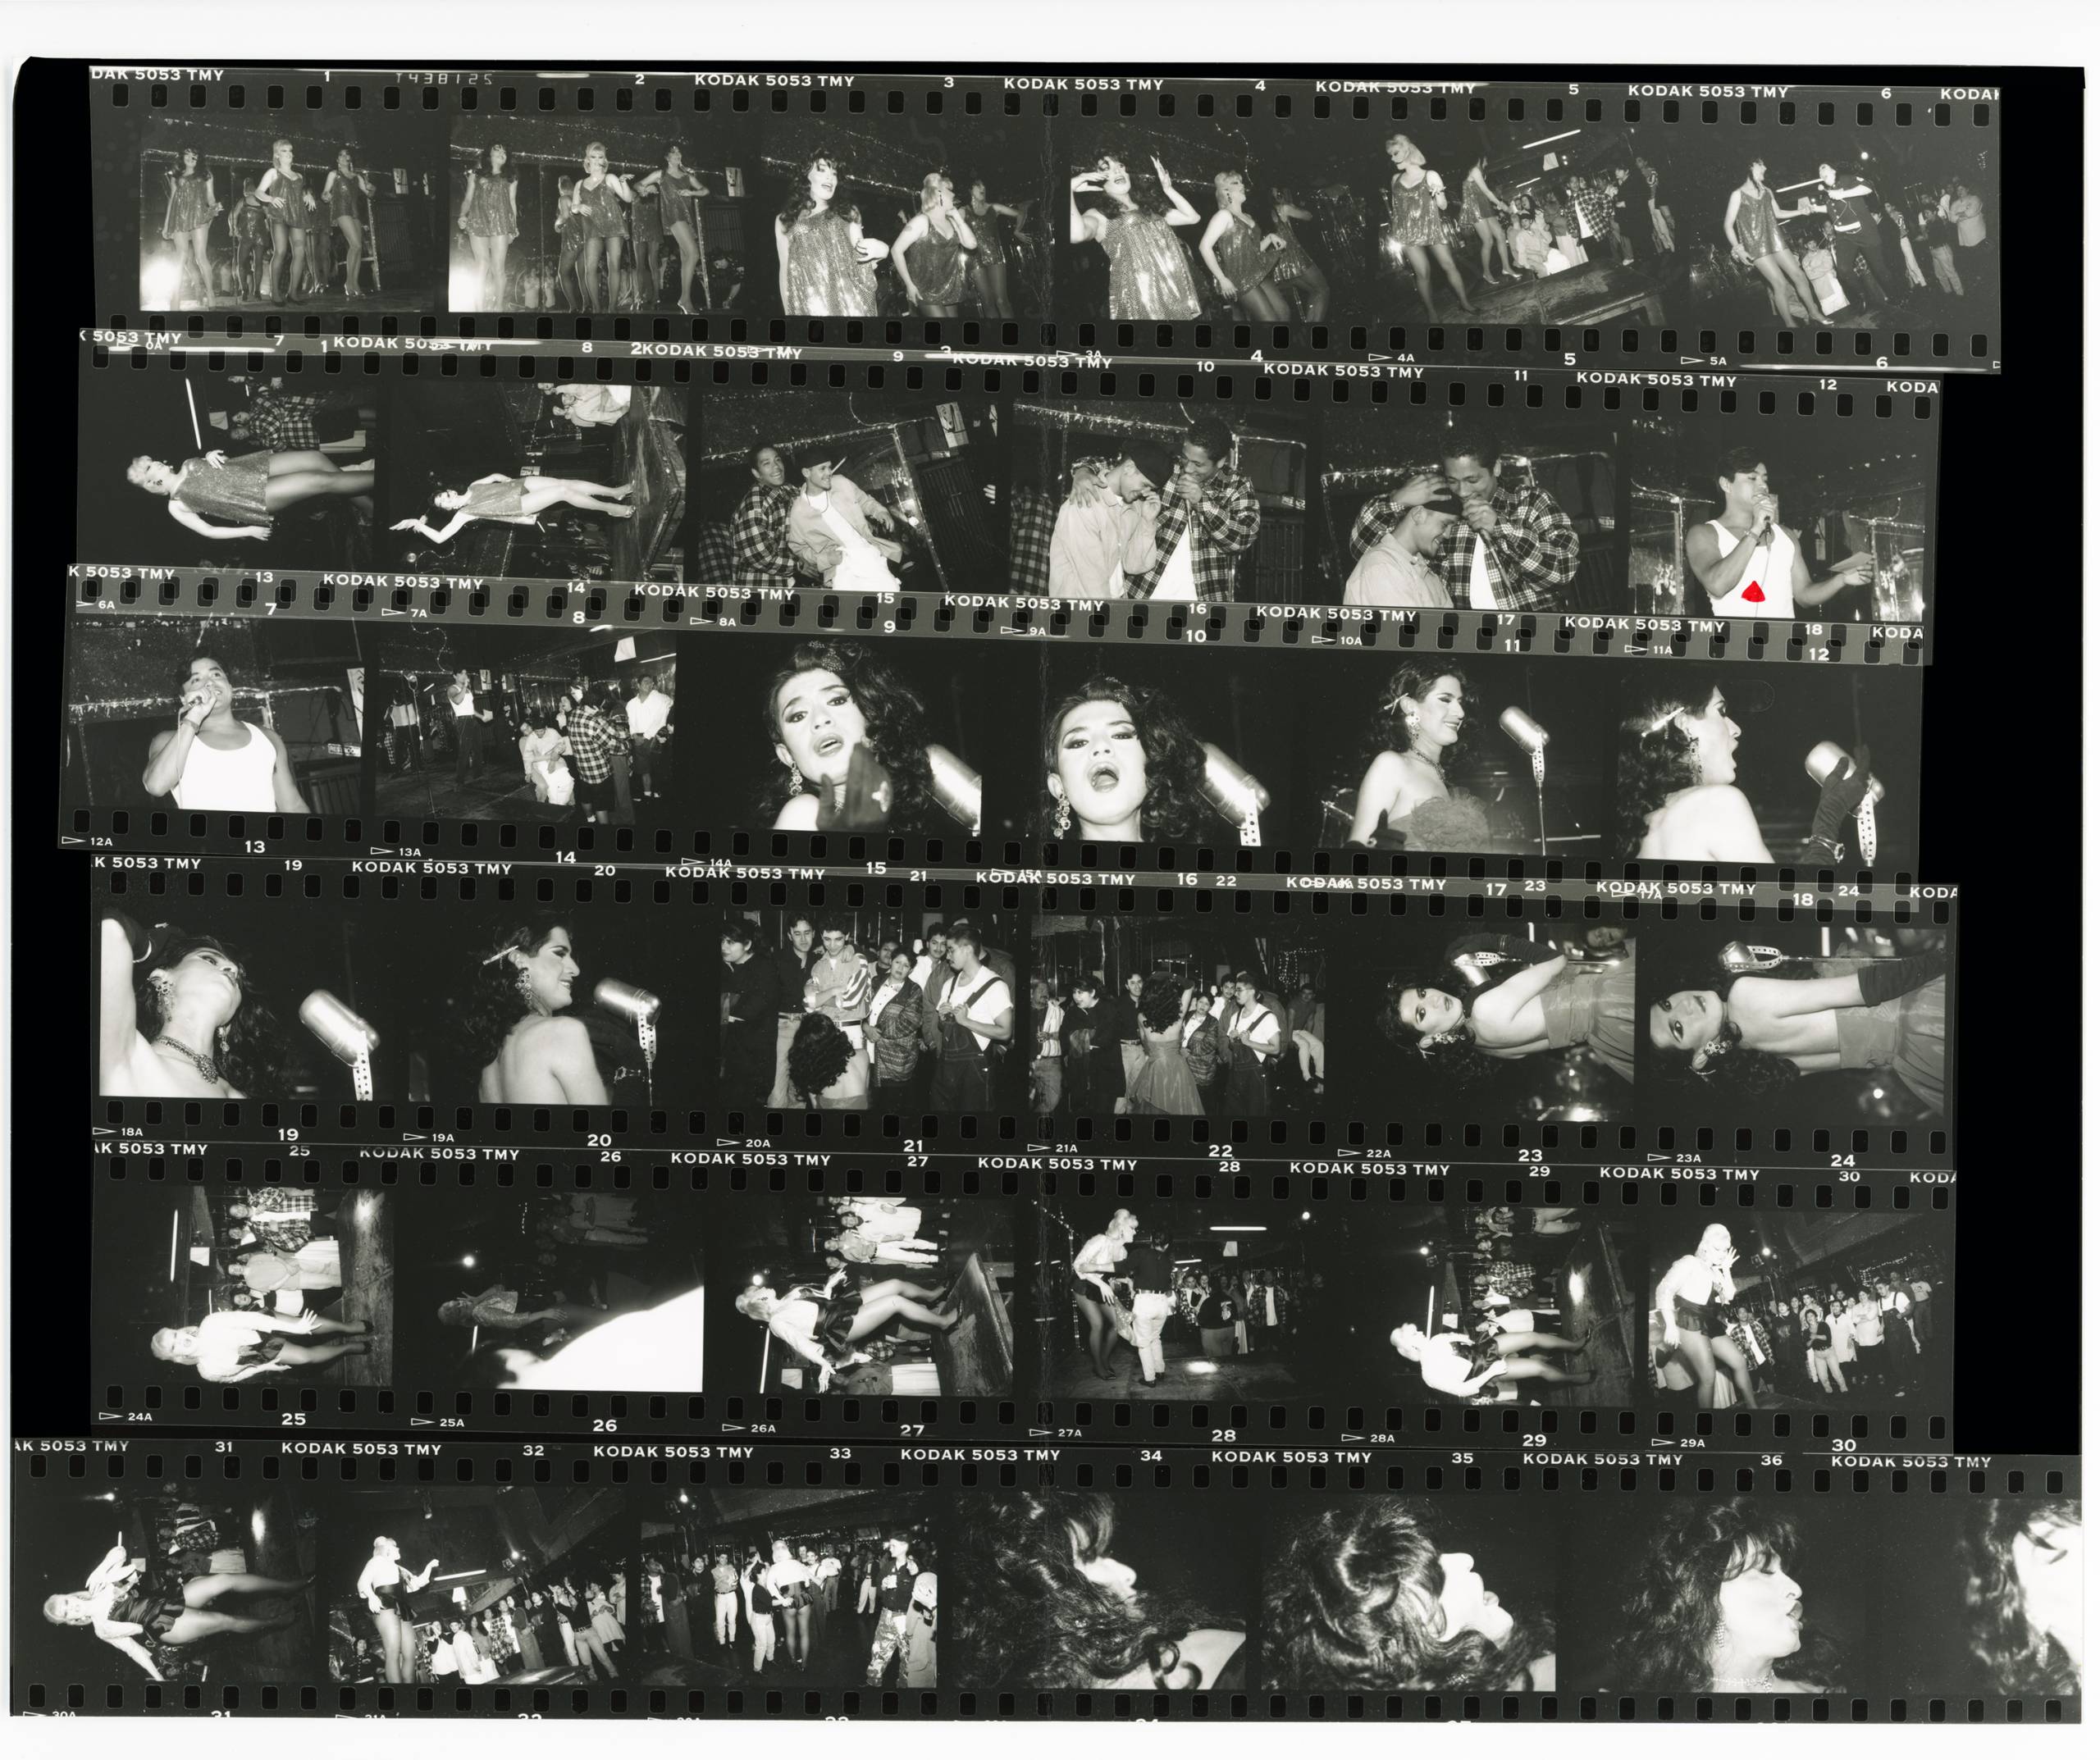 Six rows of small black-and-white negatives of people in a nightclub